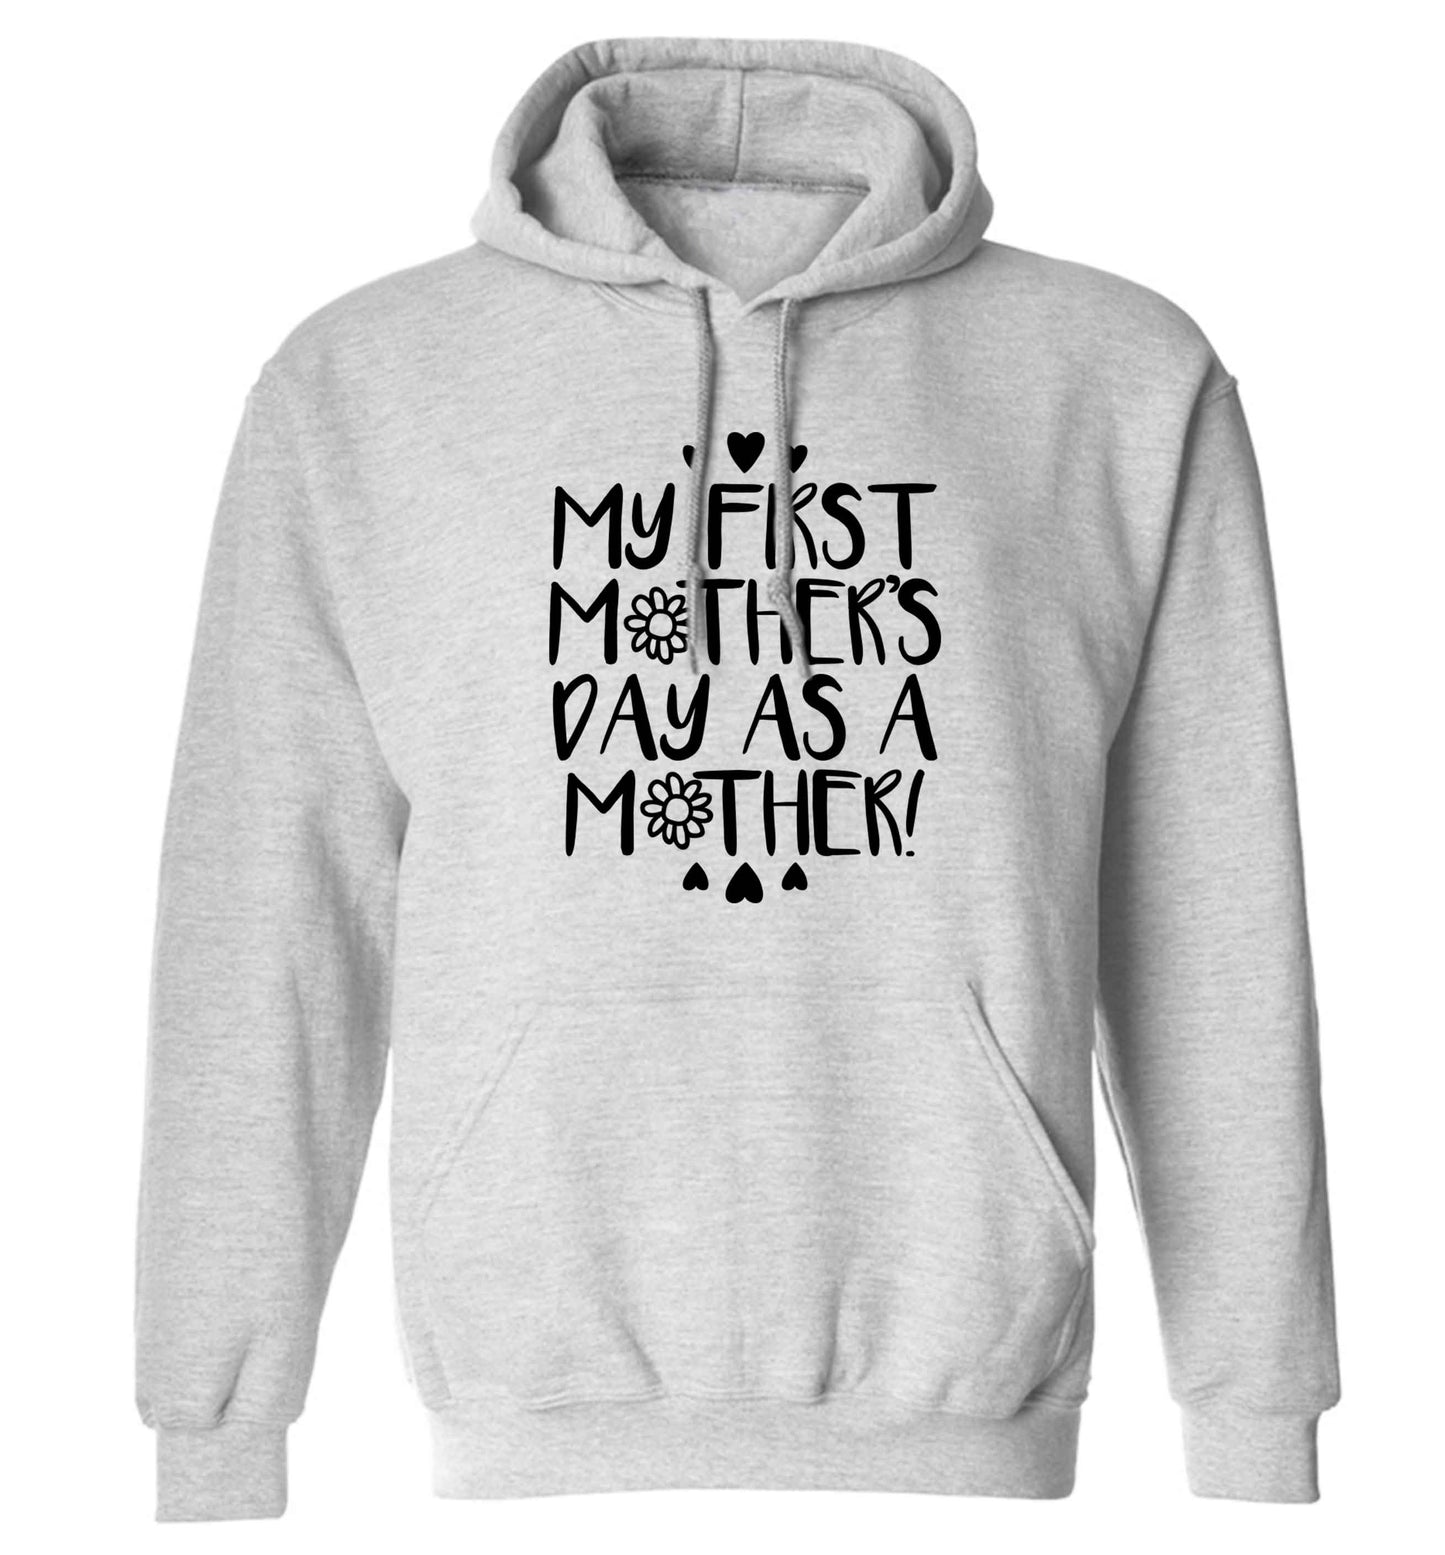 It's my first mother's day as a mother adults unisex grey hoodie 2XL